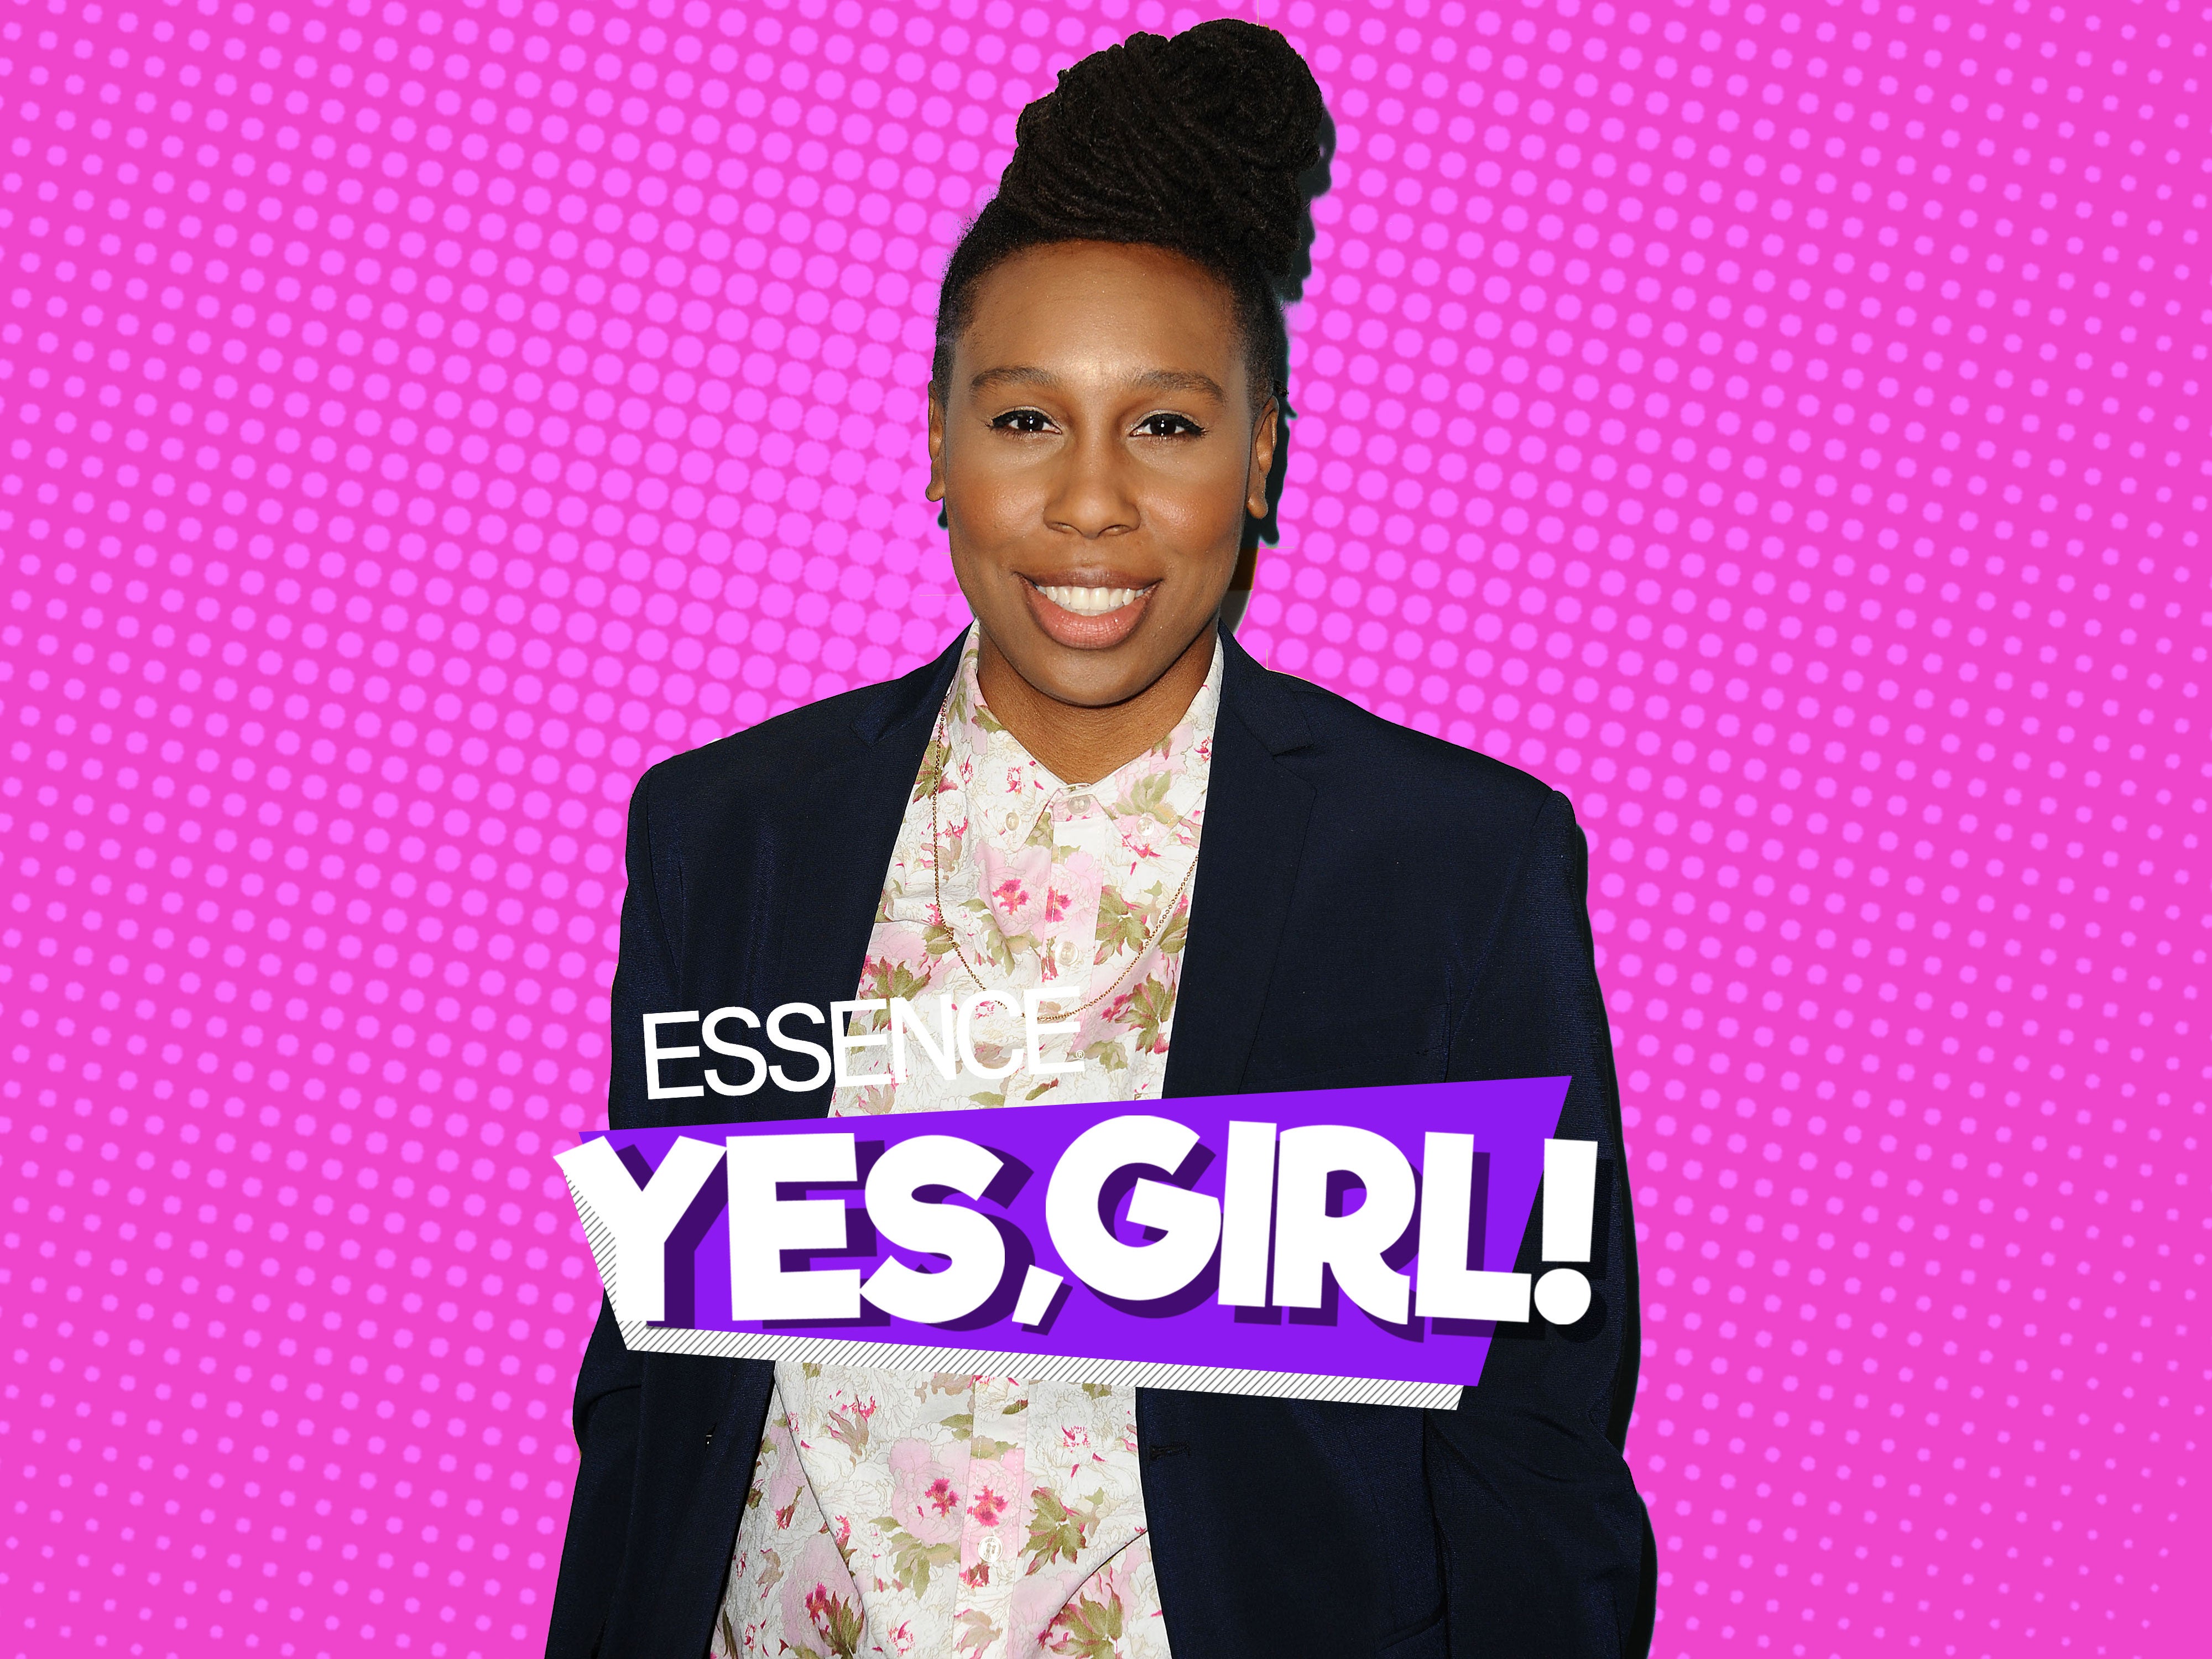 Lena Waithe Shares The Memorable Advice She Received From Director Gina Prince-Bythewood